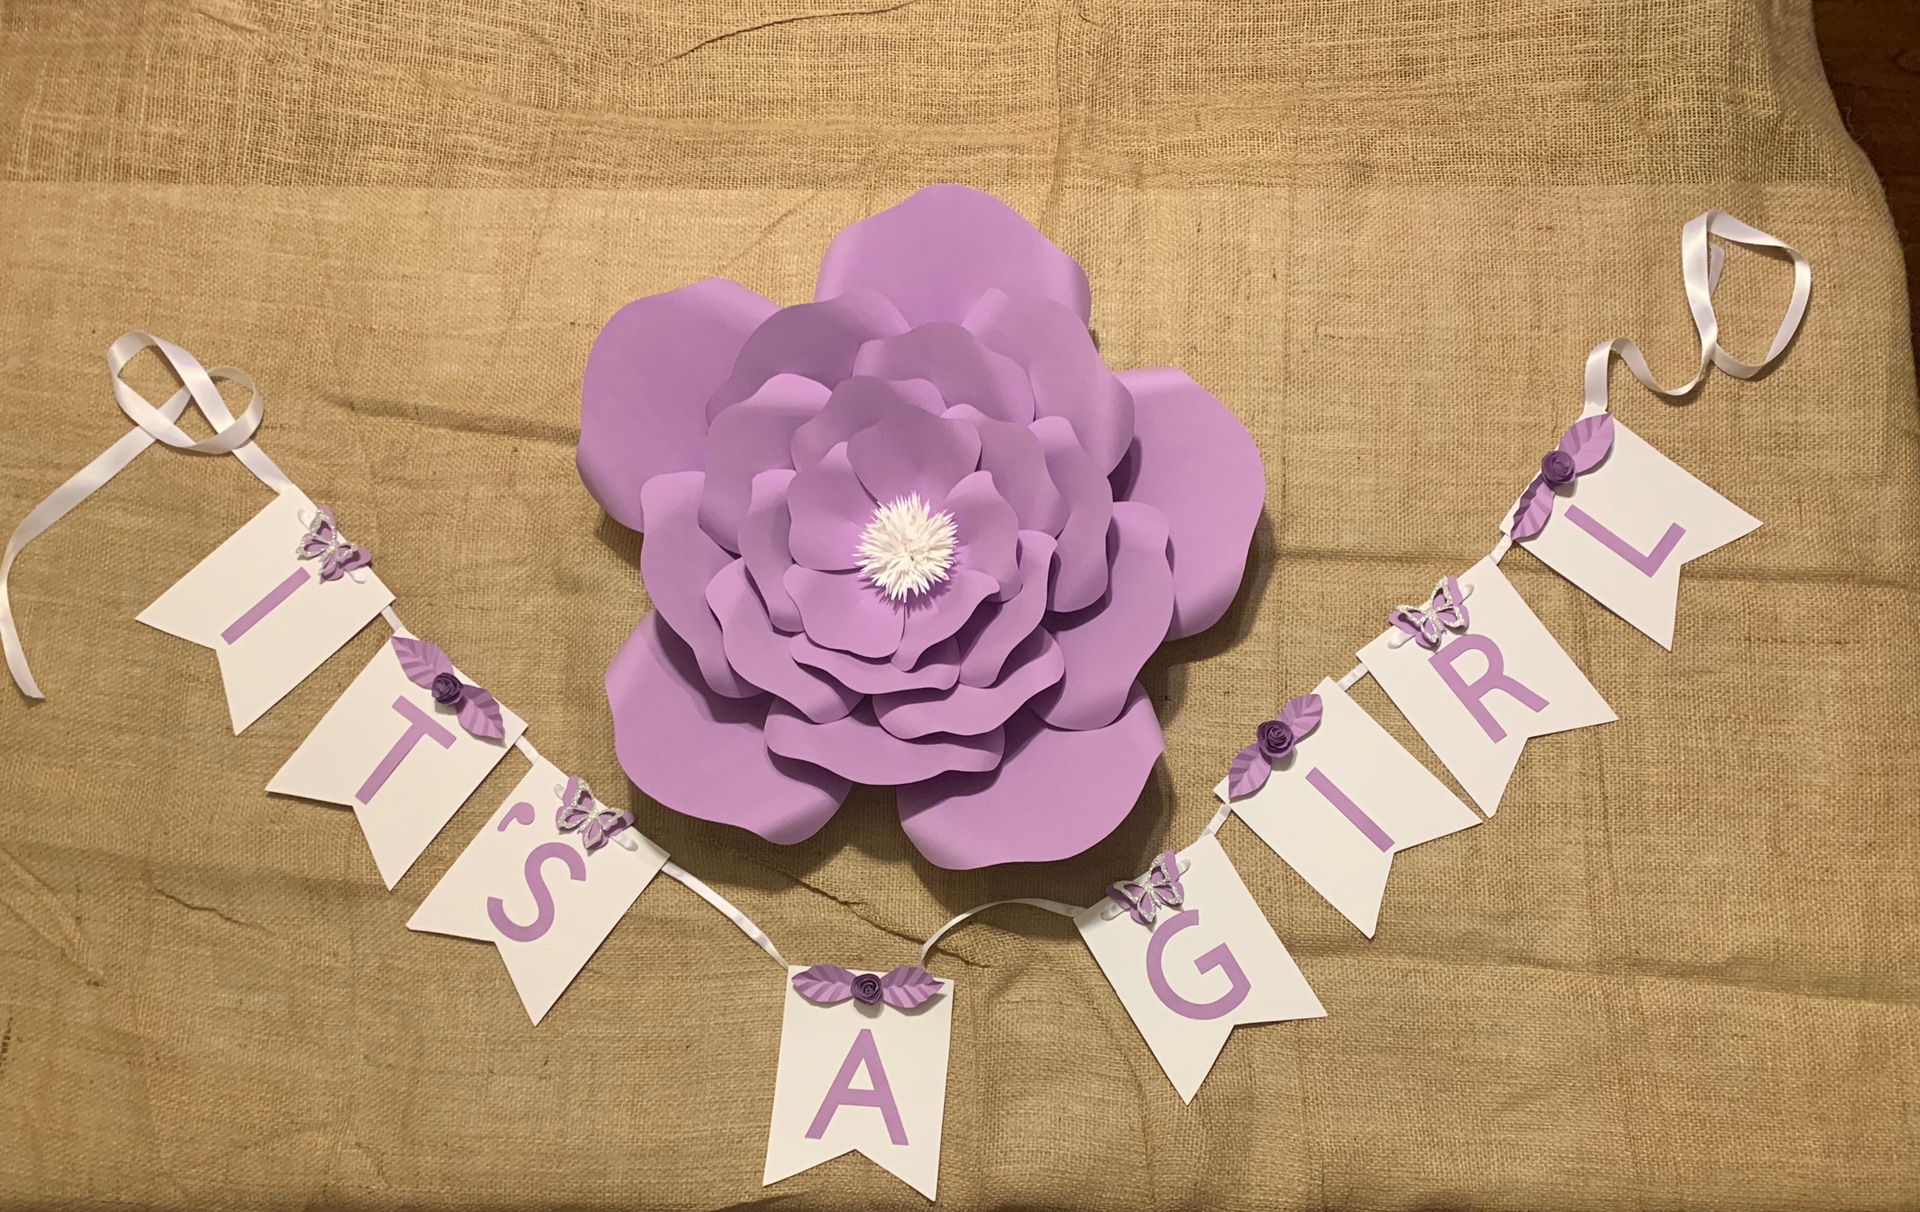 It’s a girl boy party banner for baby gender reveal baby shower decoration lavender purple and white butterflies handmade paper flower